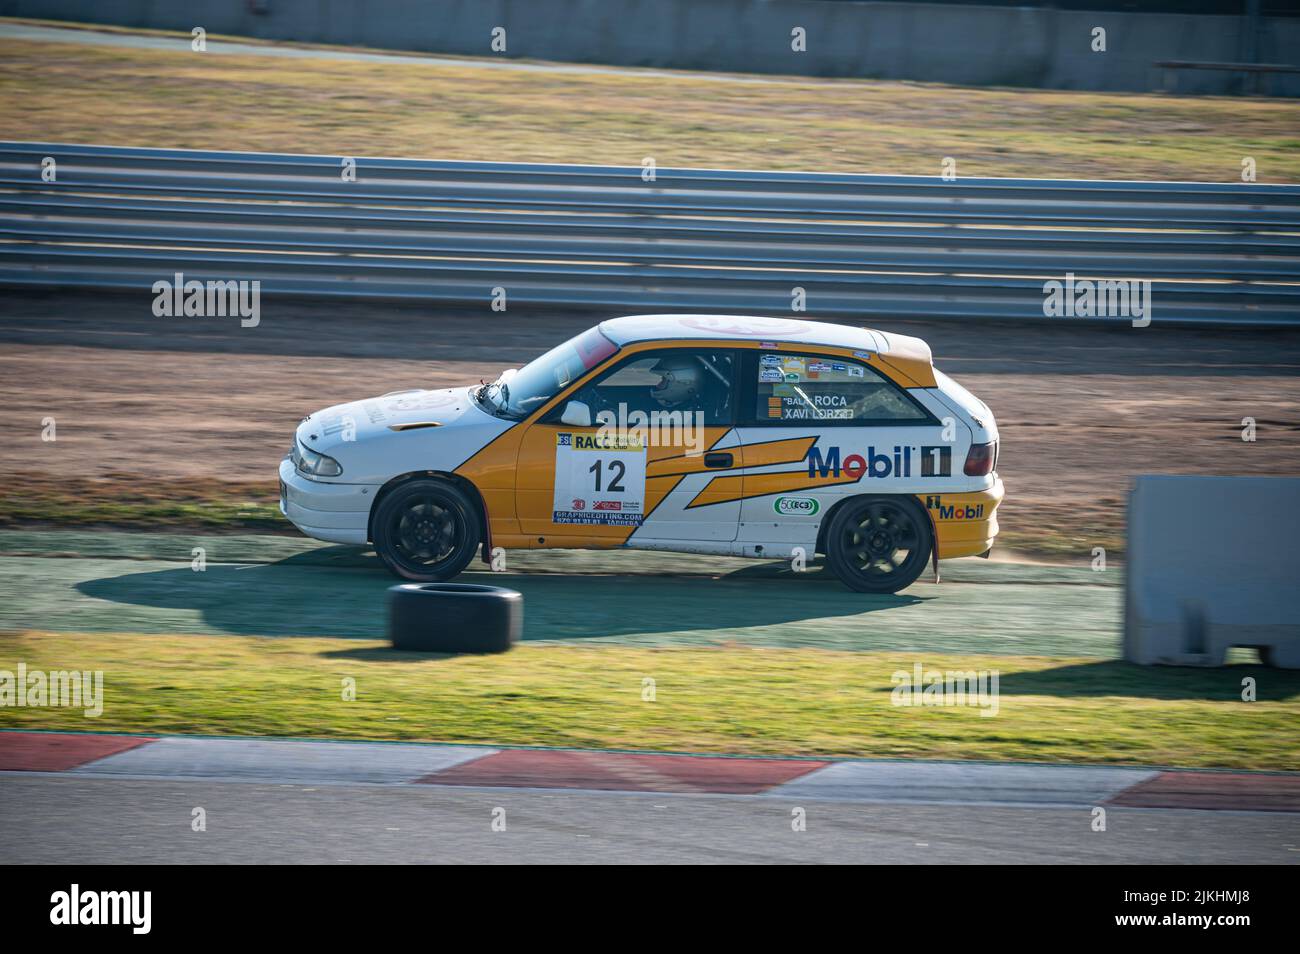 Barcelona, Spain; December 20, 2021: Opel Astra MKIRacing car in the track of Montmelo Stock Photo